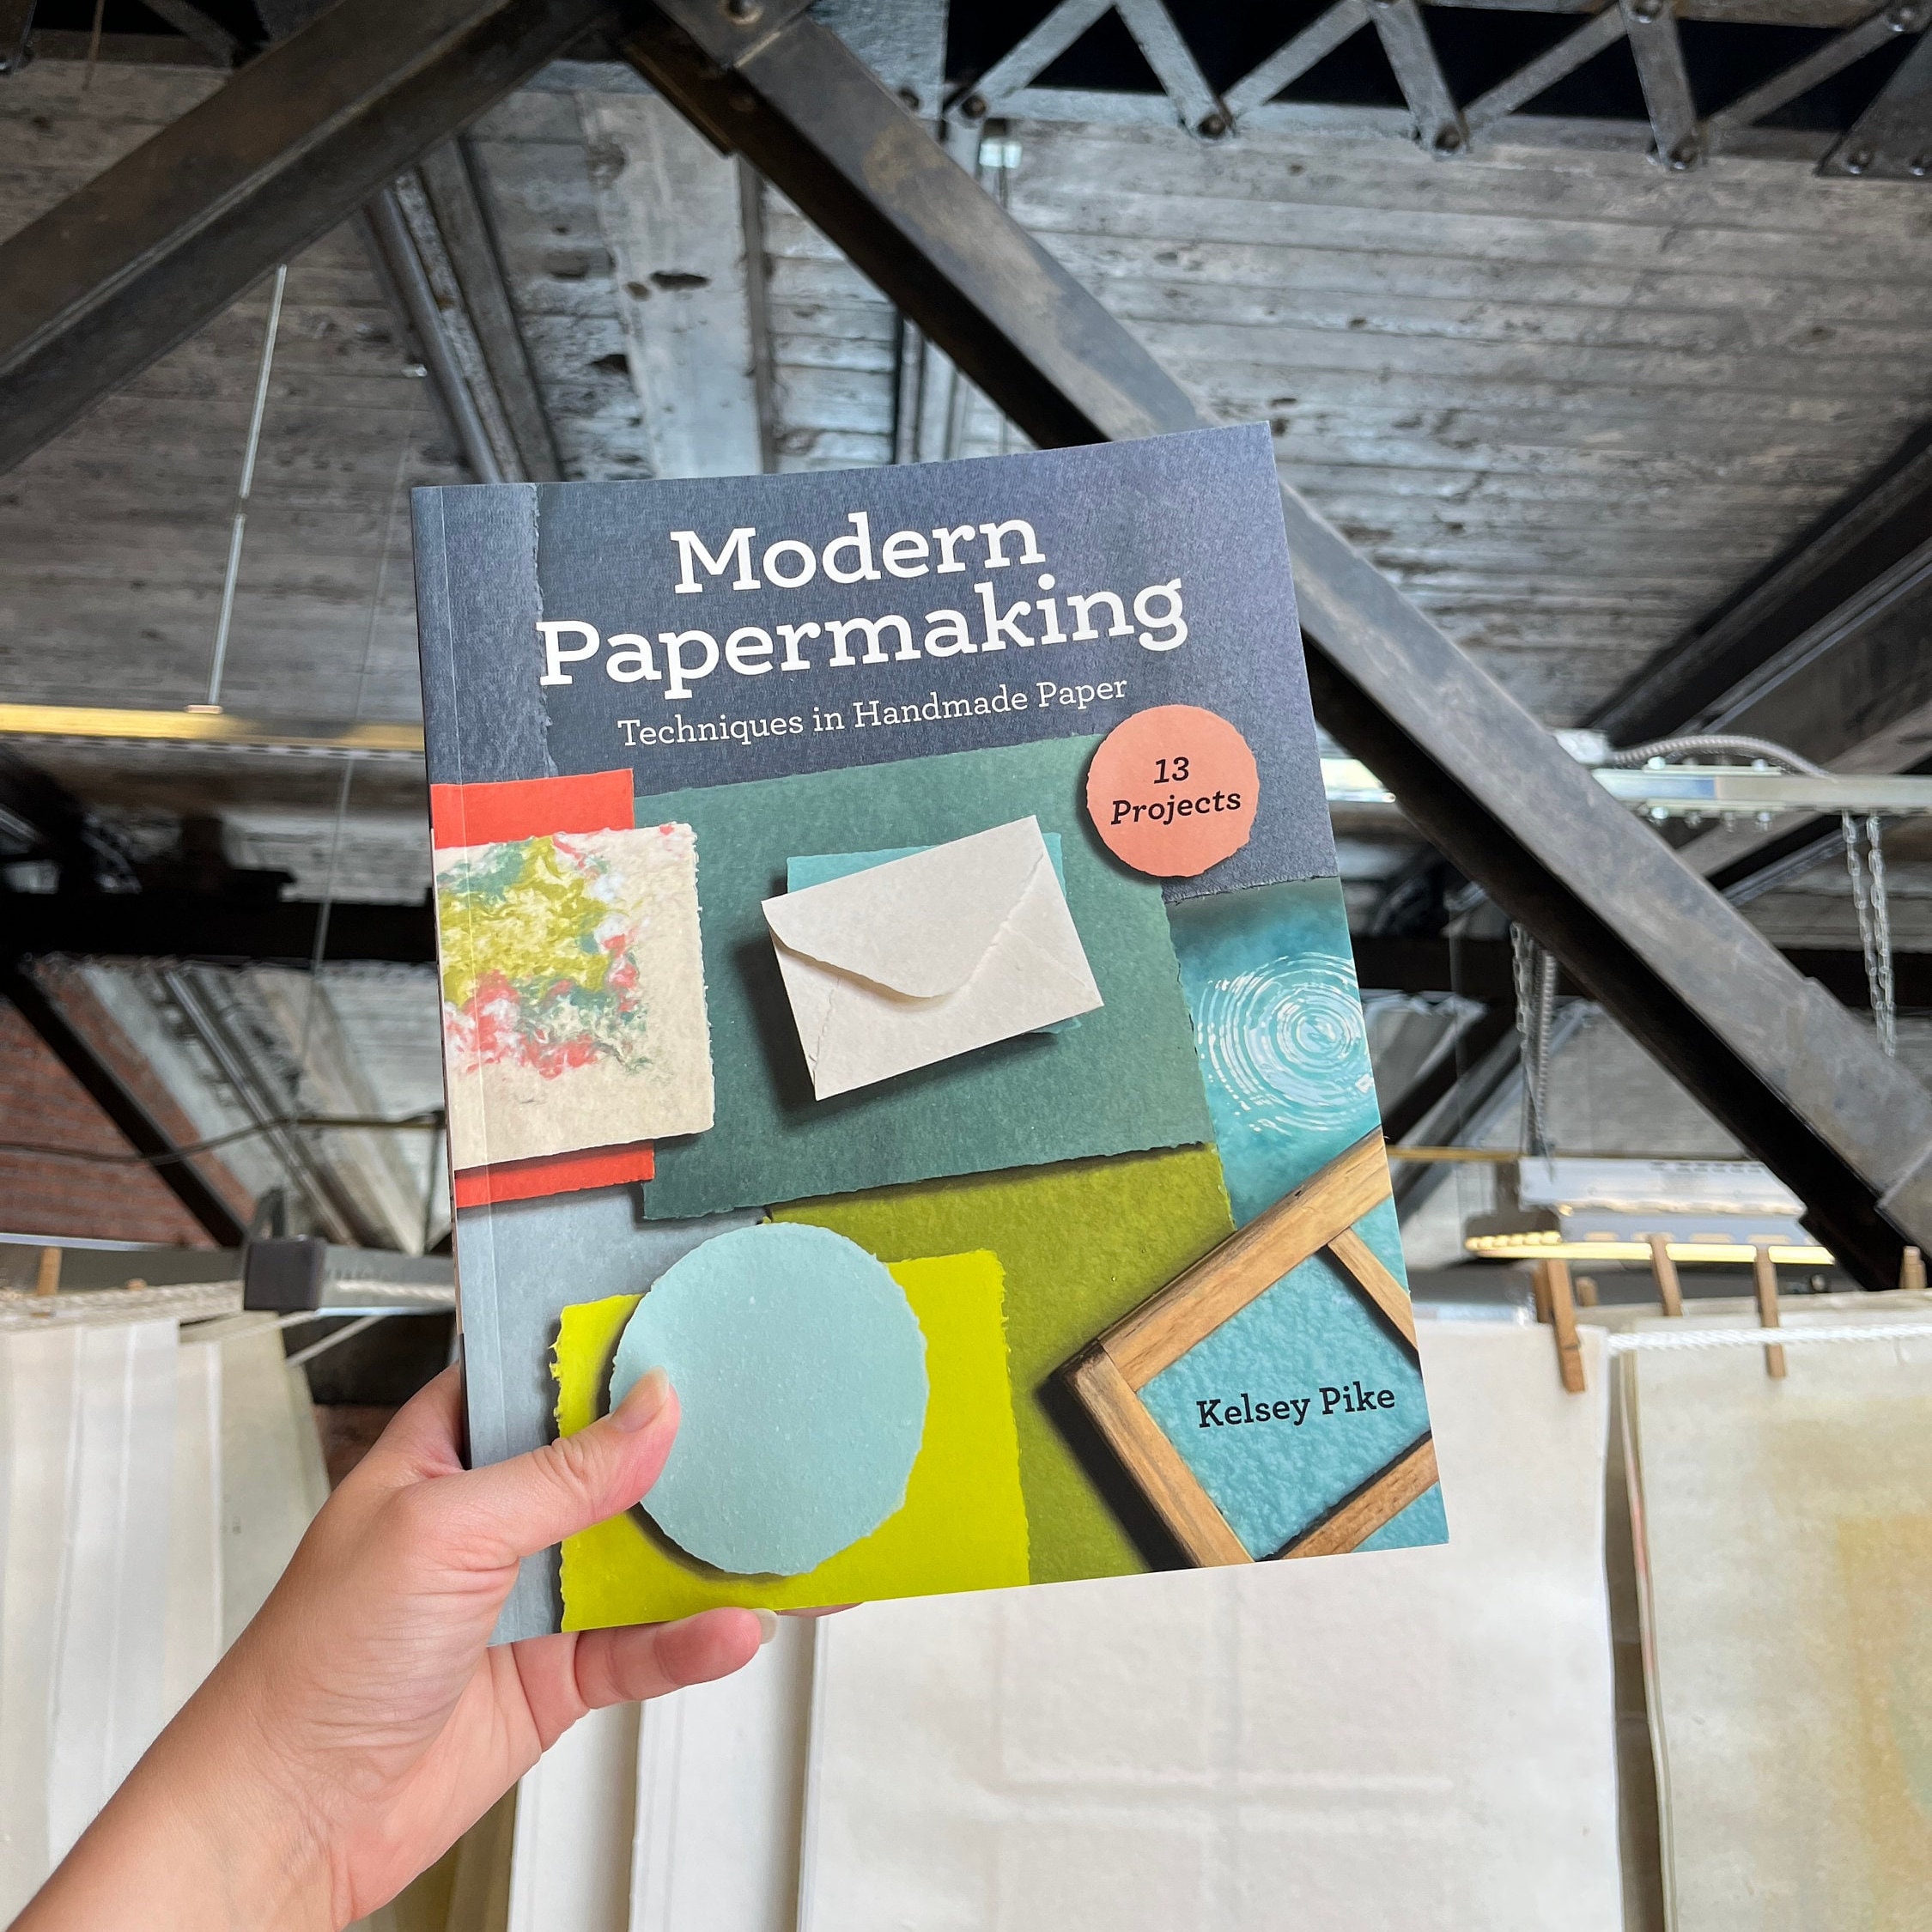 Mold and Deckle for Handmade Paper 